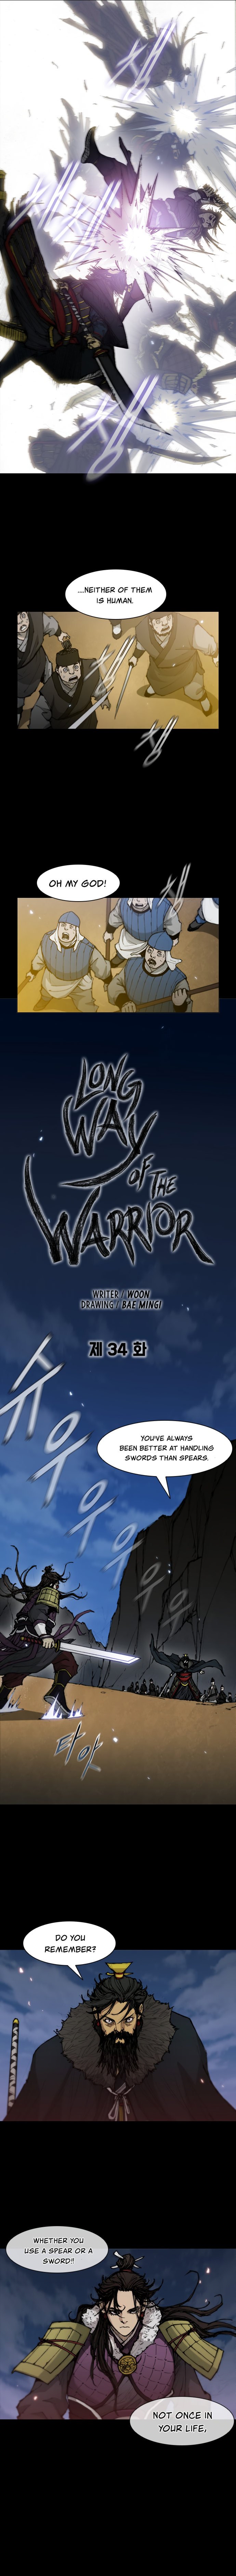 long-way-of-the-warrior-chap-34-4